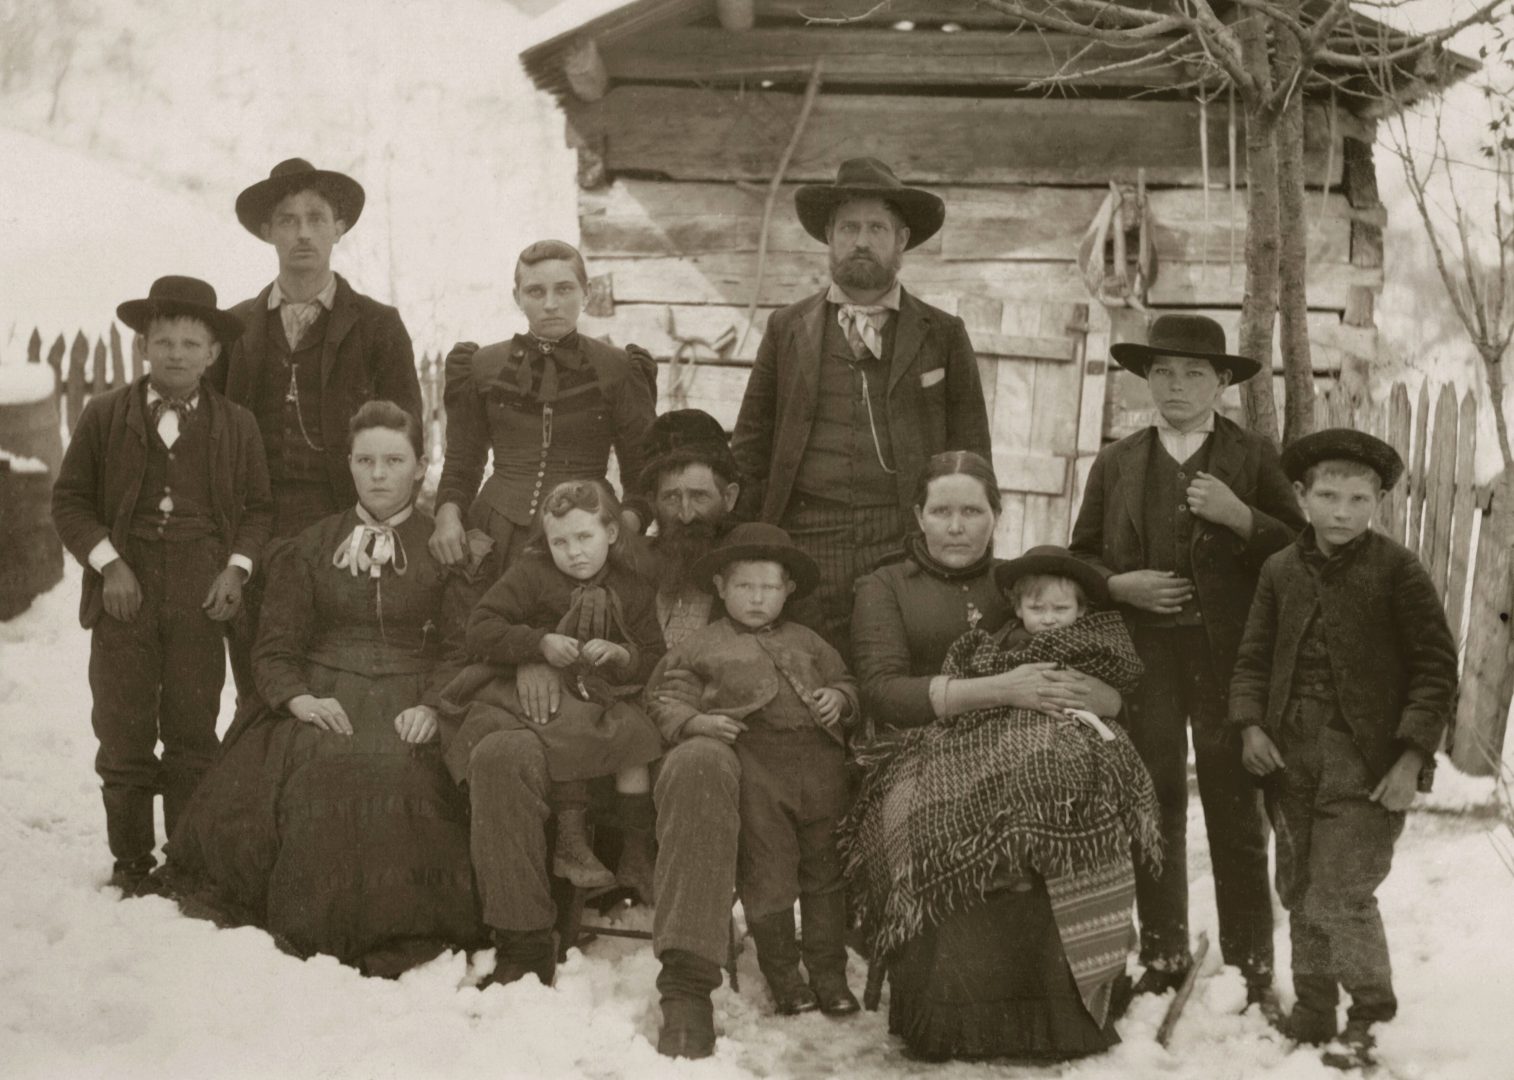 William Anderson Hatfield (center) sits surrounded by his family on a winter's day. Circa 1890s.